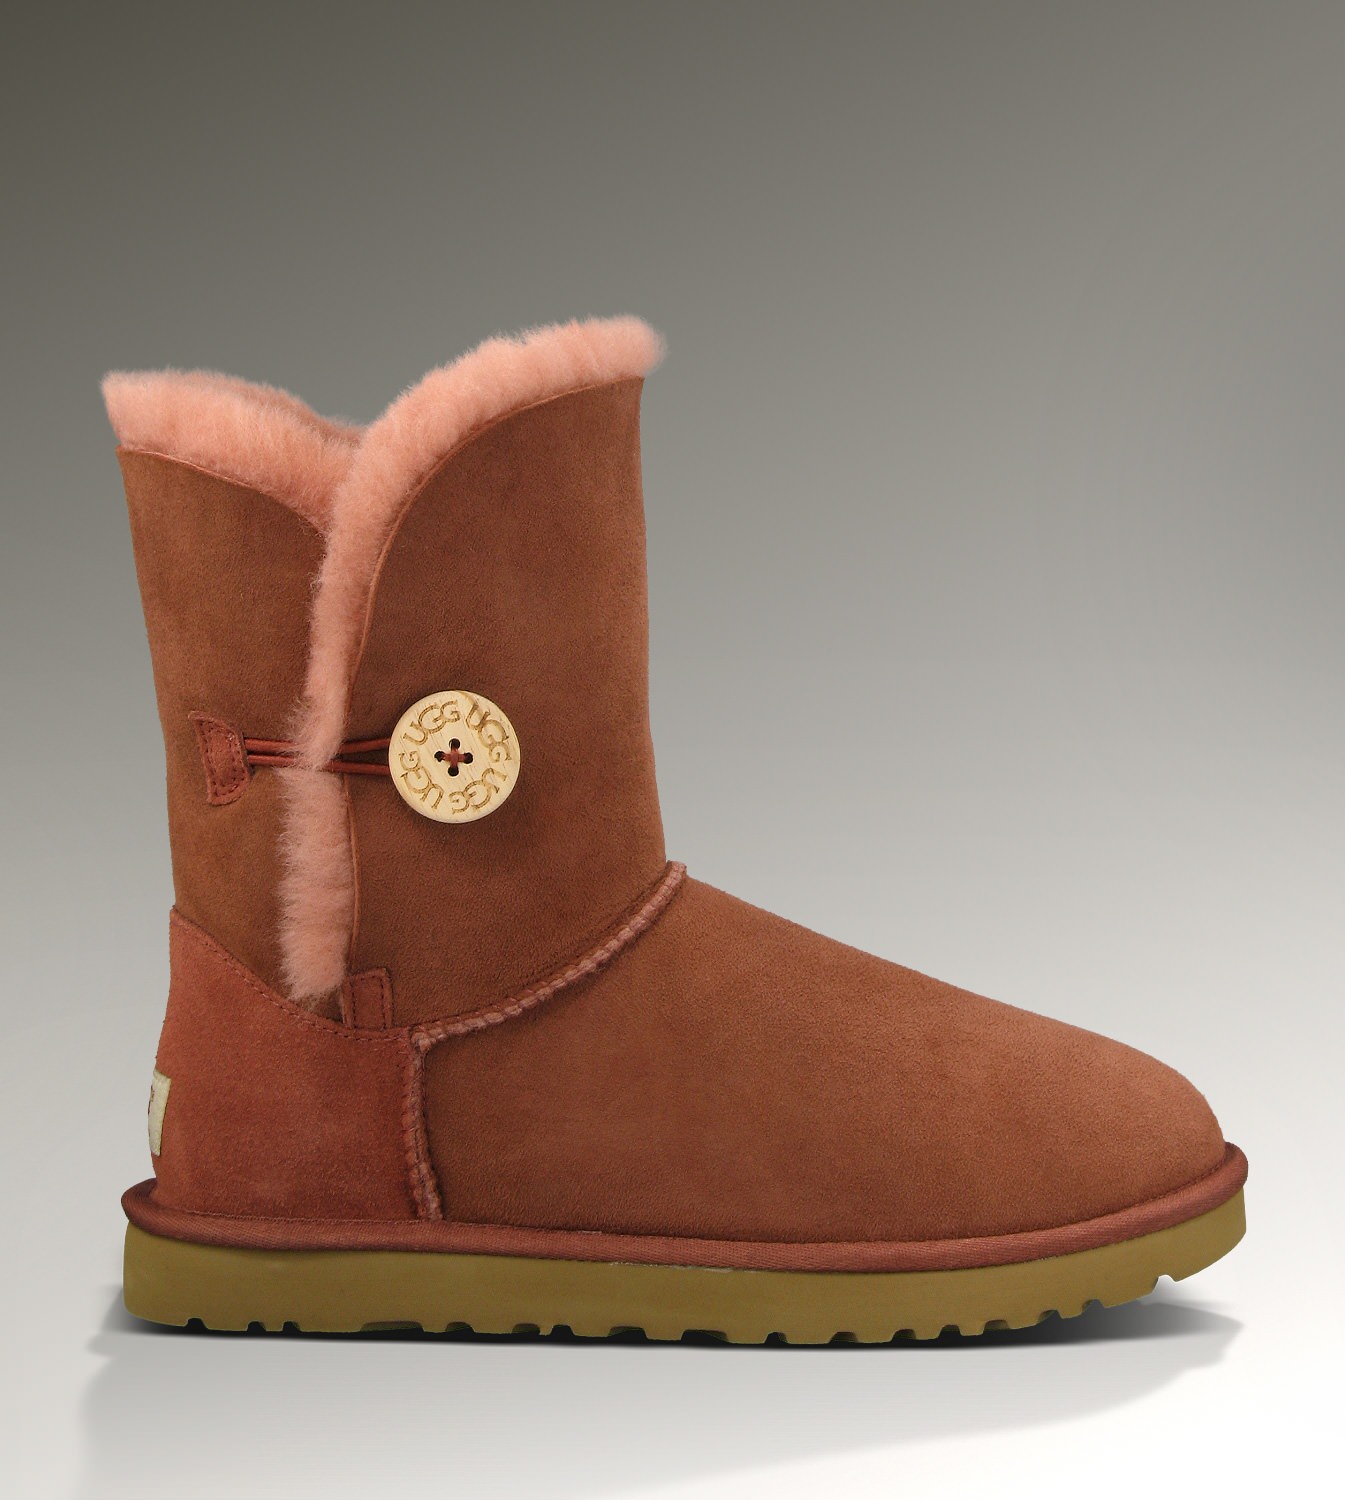 Ugg Outlet Bailey Button Auburn Boots 102784